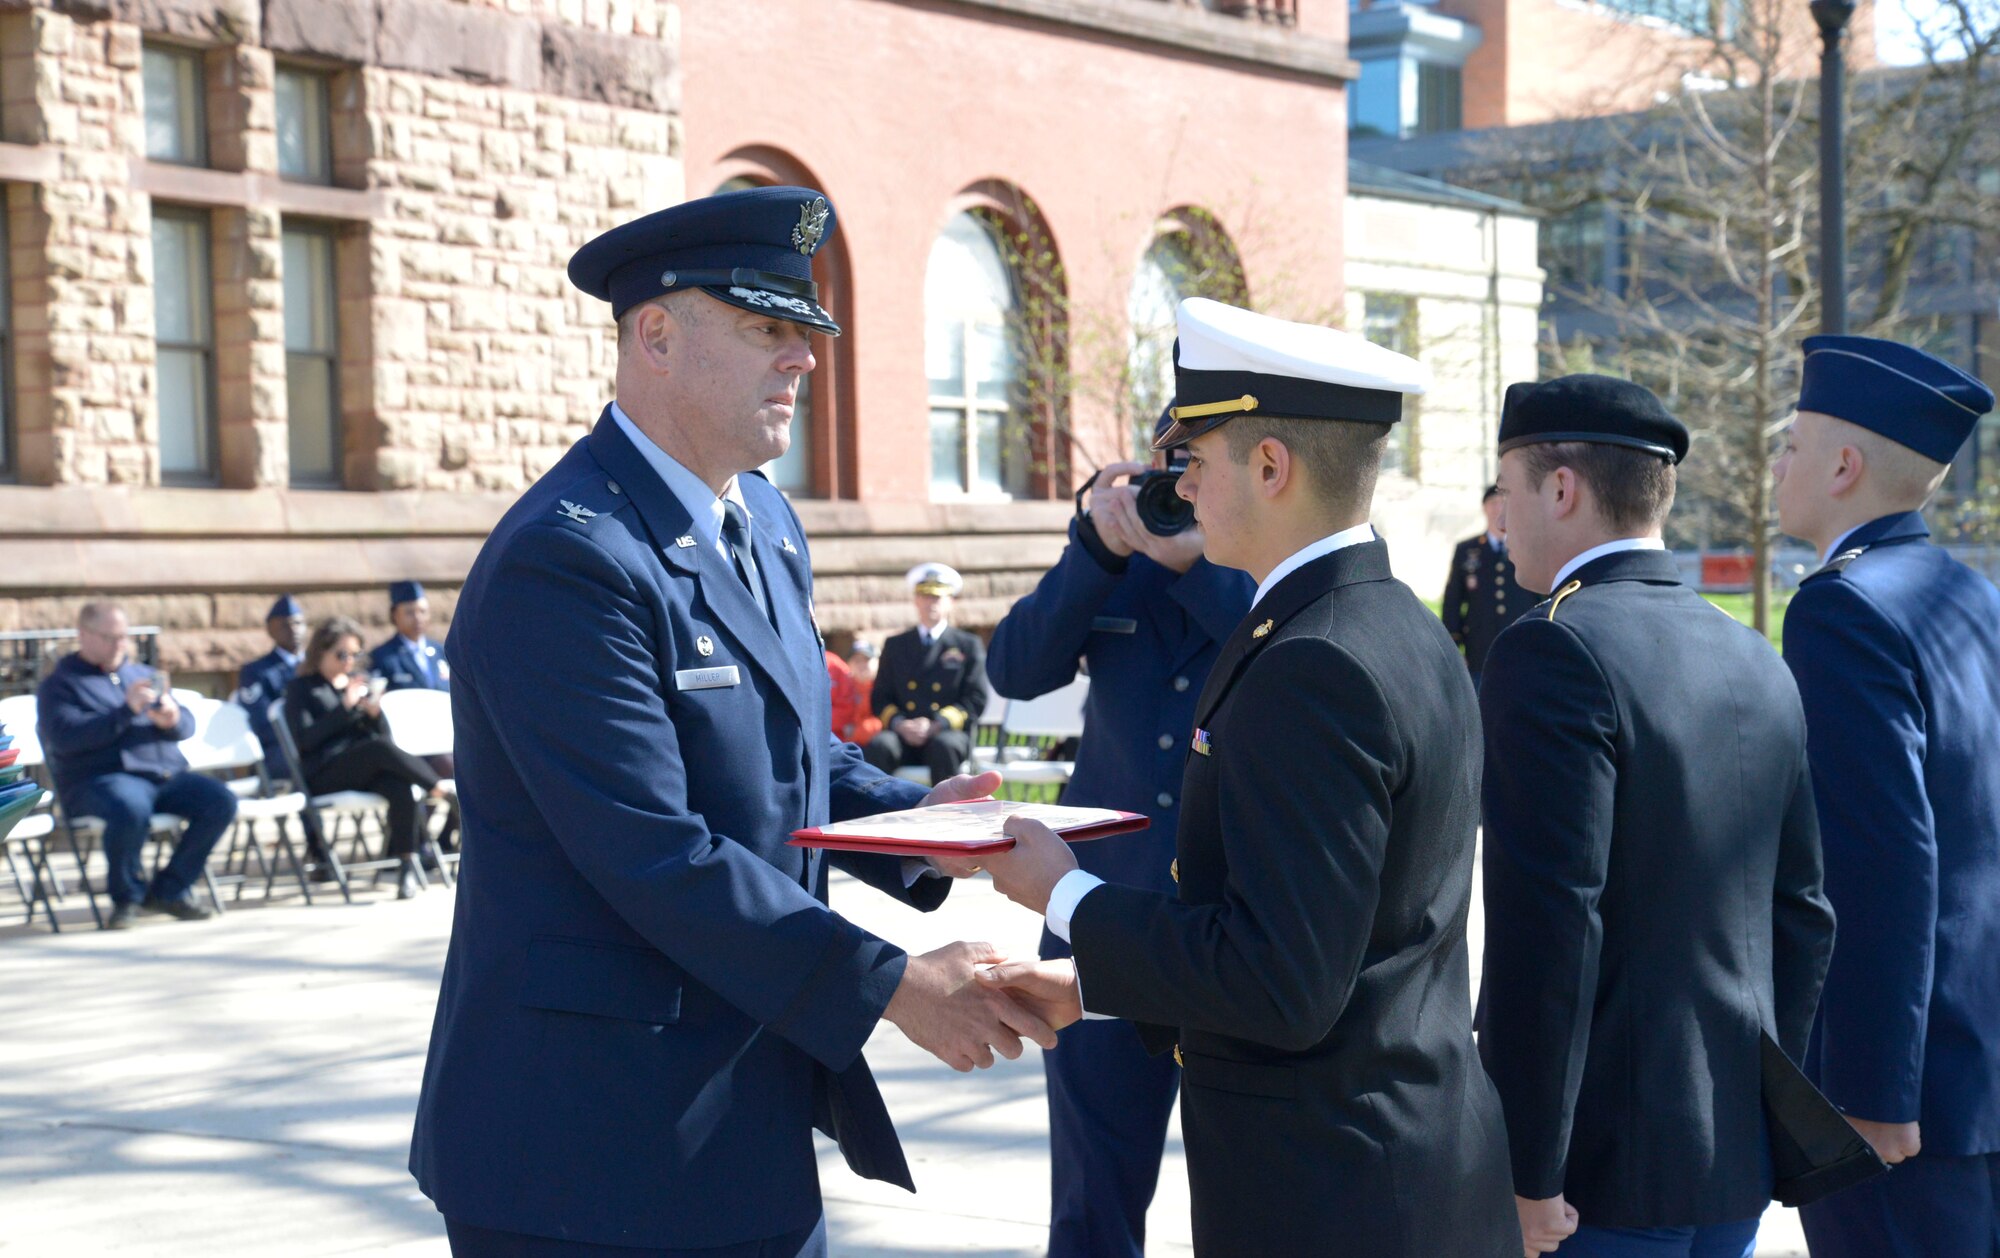 Col. Patrick Miller, 88th Air Base Wing and Wright-Patterson Air Force Base commander, awards Navy ROTC midshipman Colin Patil the Major Lawrence scholarship April 14, 2022 at Ohio State University. The Tri-Service Parade has been a tradition at Ohio State University since 1916, and allows several cadets and midshipmen to receive scholarship awards from generous donors. (U.S. Air Force photo by Darrius Parker)